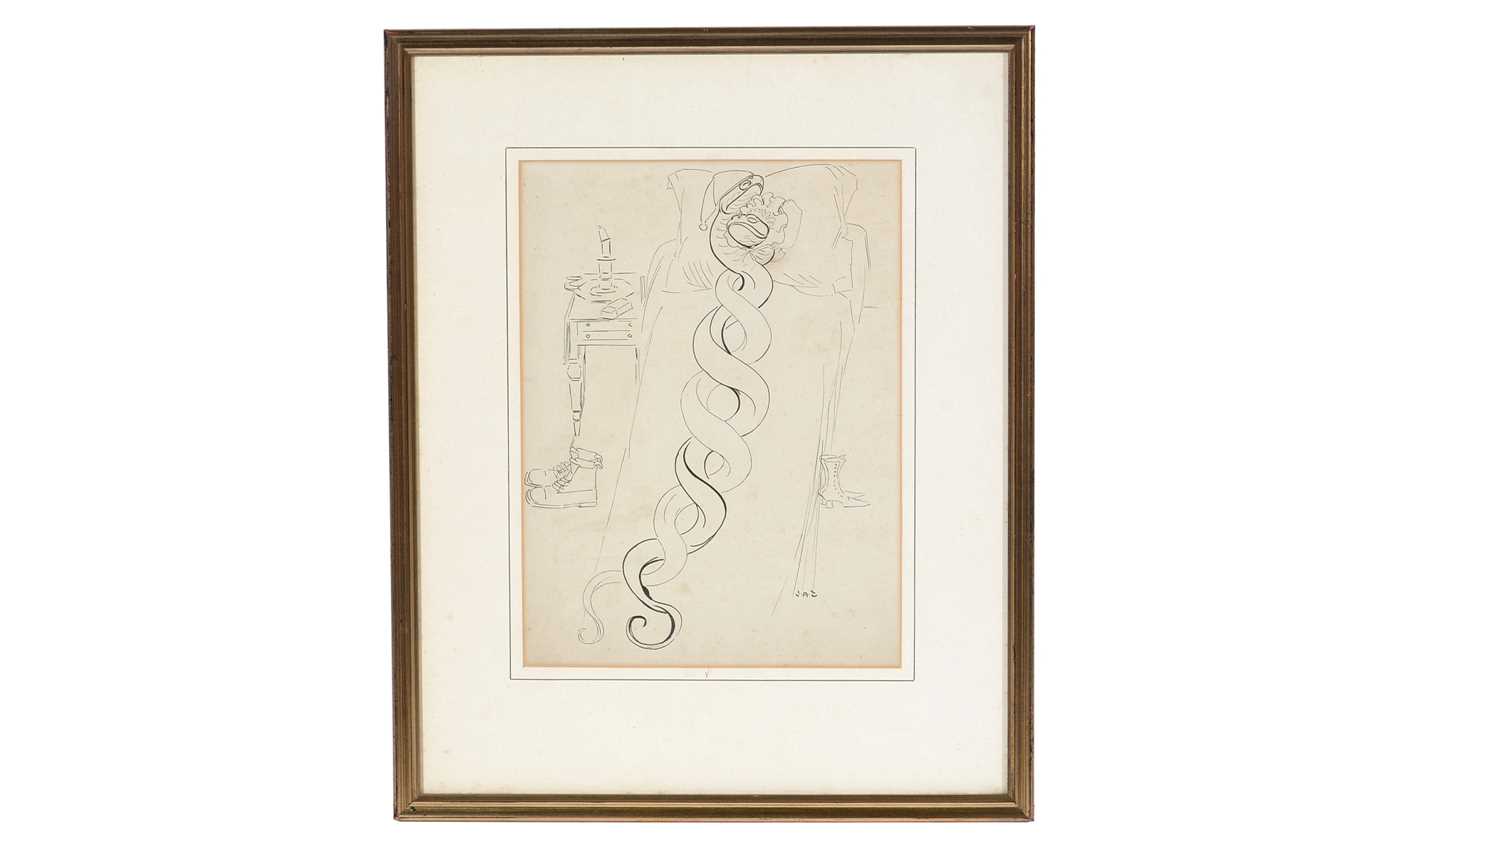 Lot 67 - James Affleck Shepherd - Vipers Twine Lovingly Twogether | pen and ink